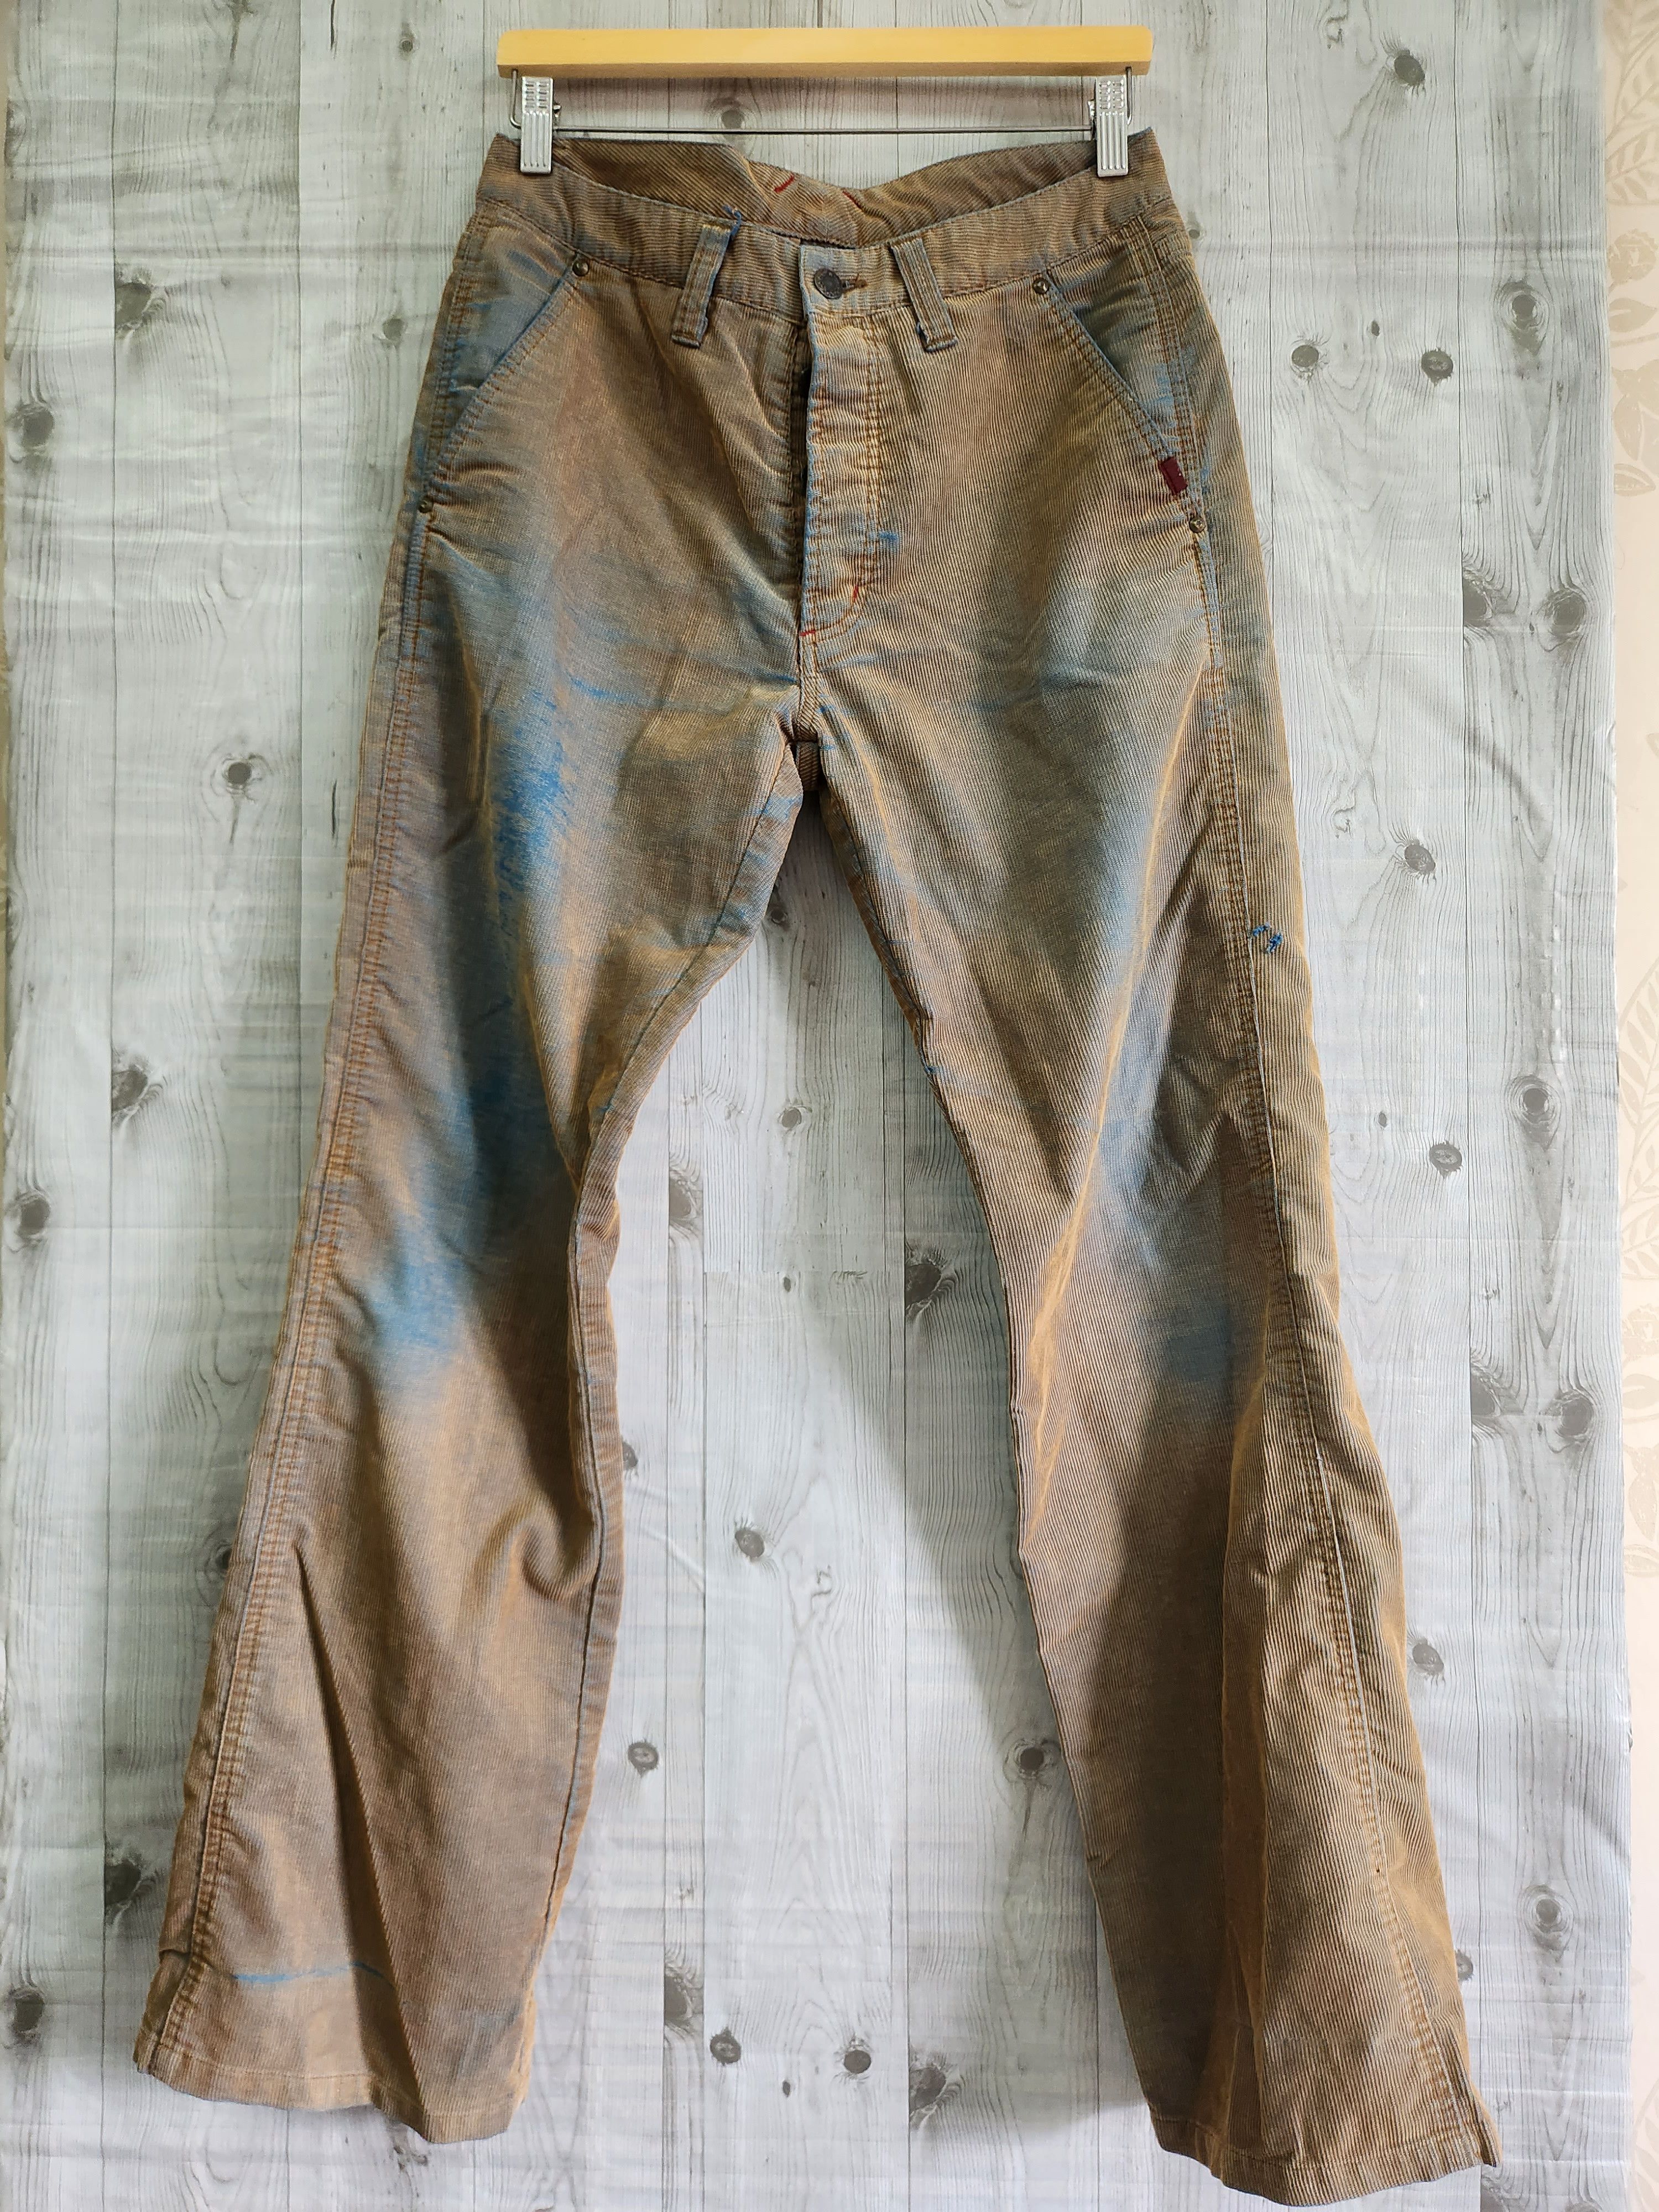 Key Acquisitions - Acquiesce Distressed Faded Bluish Denim Jeans Japanese - 1